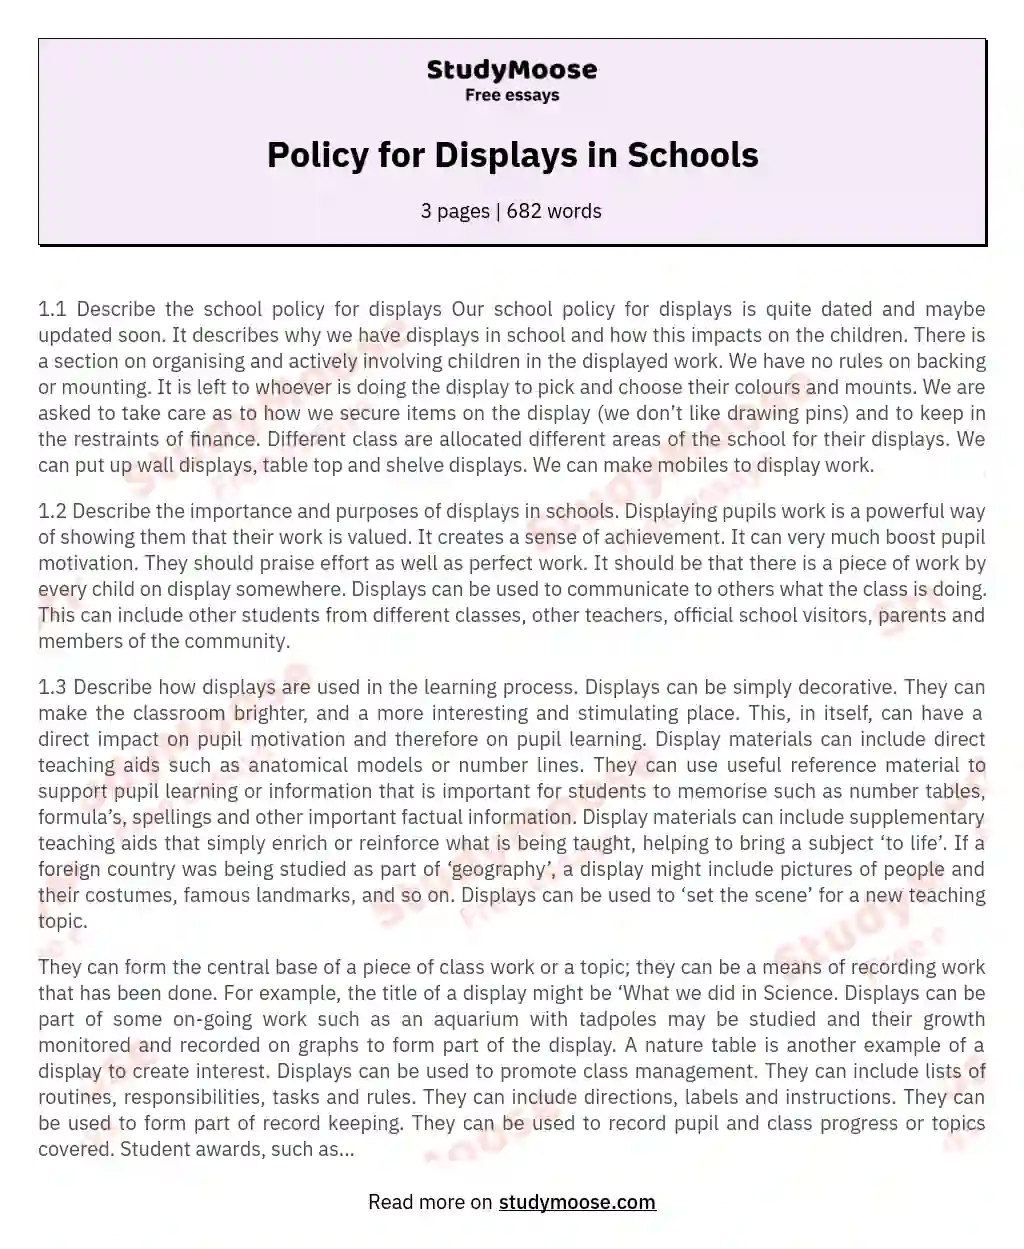 Policy for Displays in Schools essay